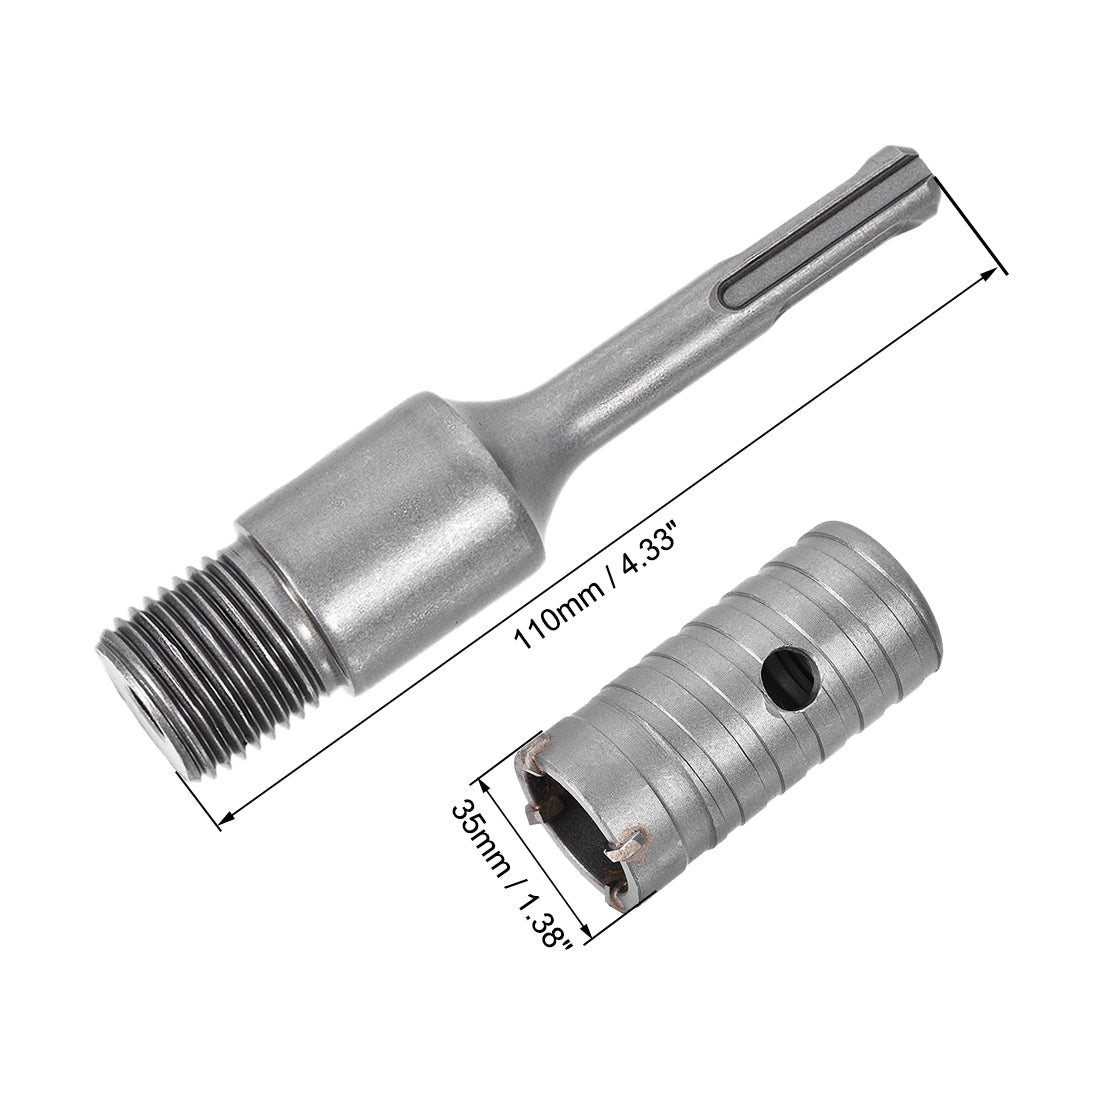 uxcell Uxcell Wall Hole Drill Bit Hole Saw Connecting Rod Drill for SDS X4 Impact Drill